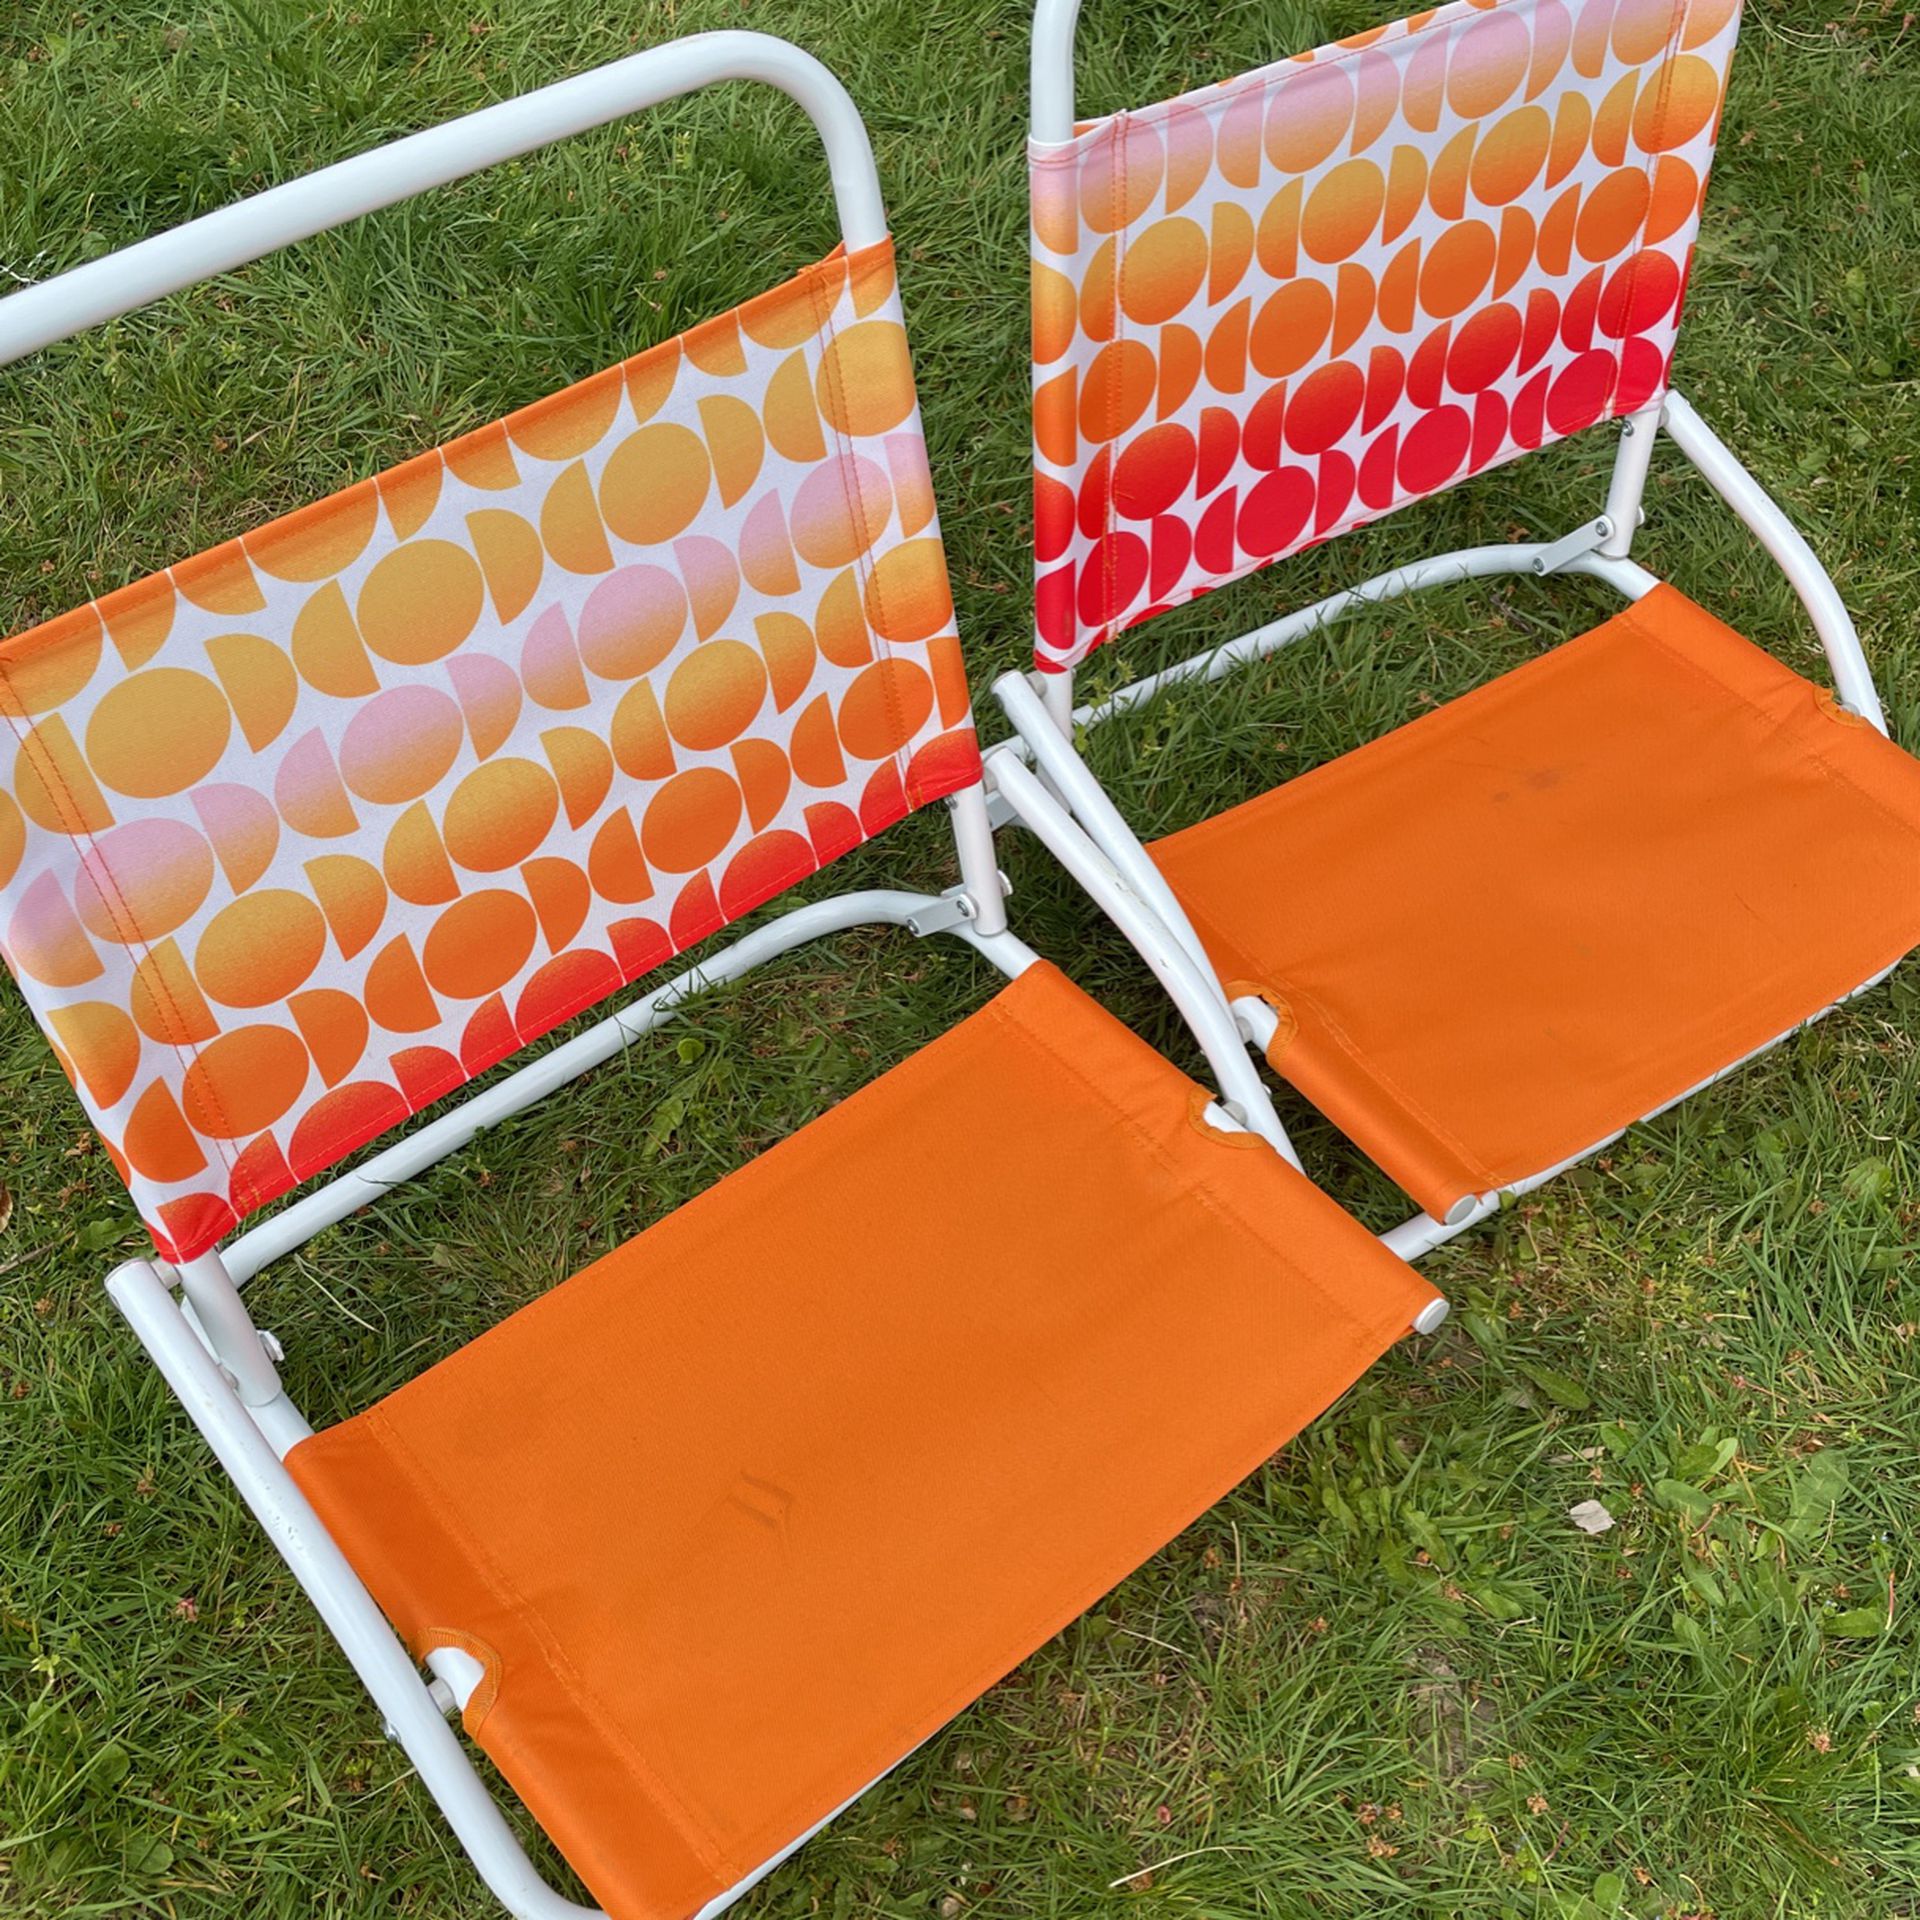 Two Low Profile Folding Chairs